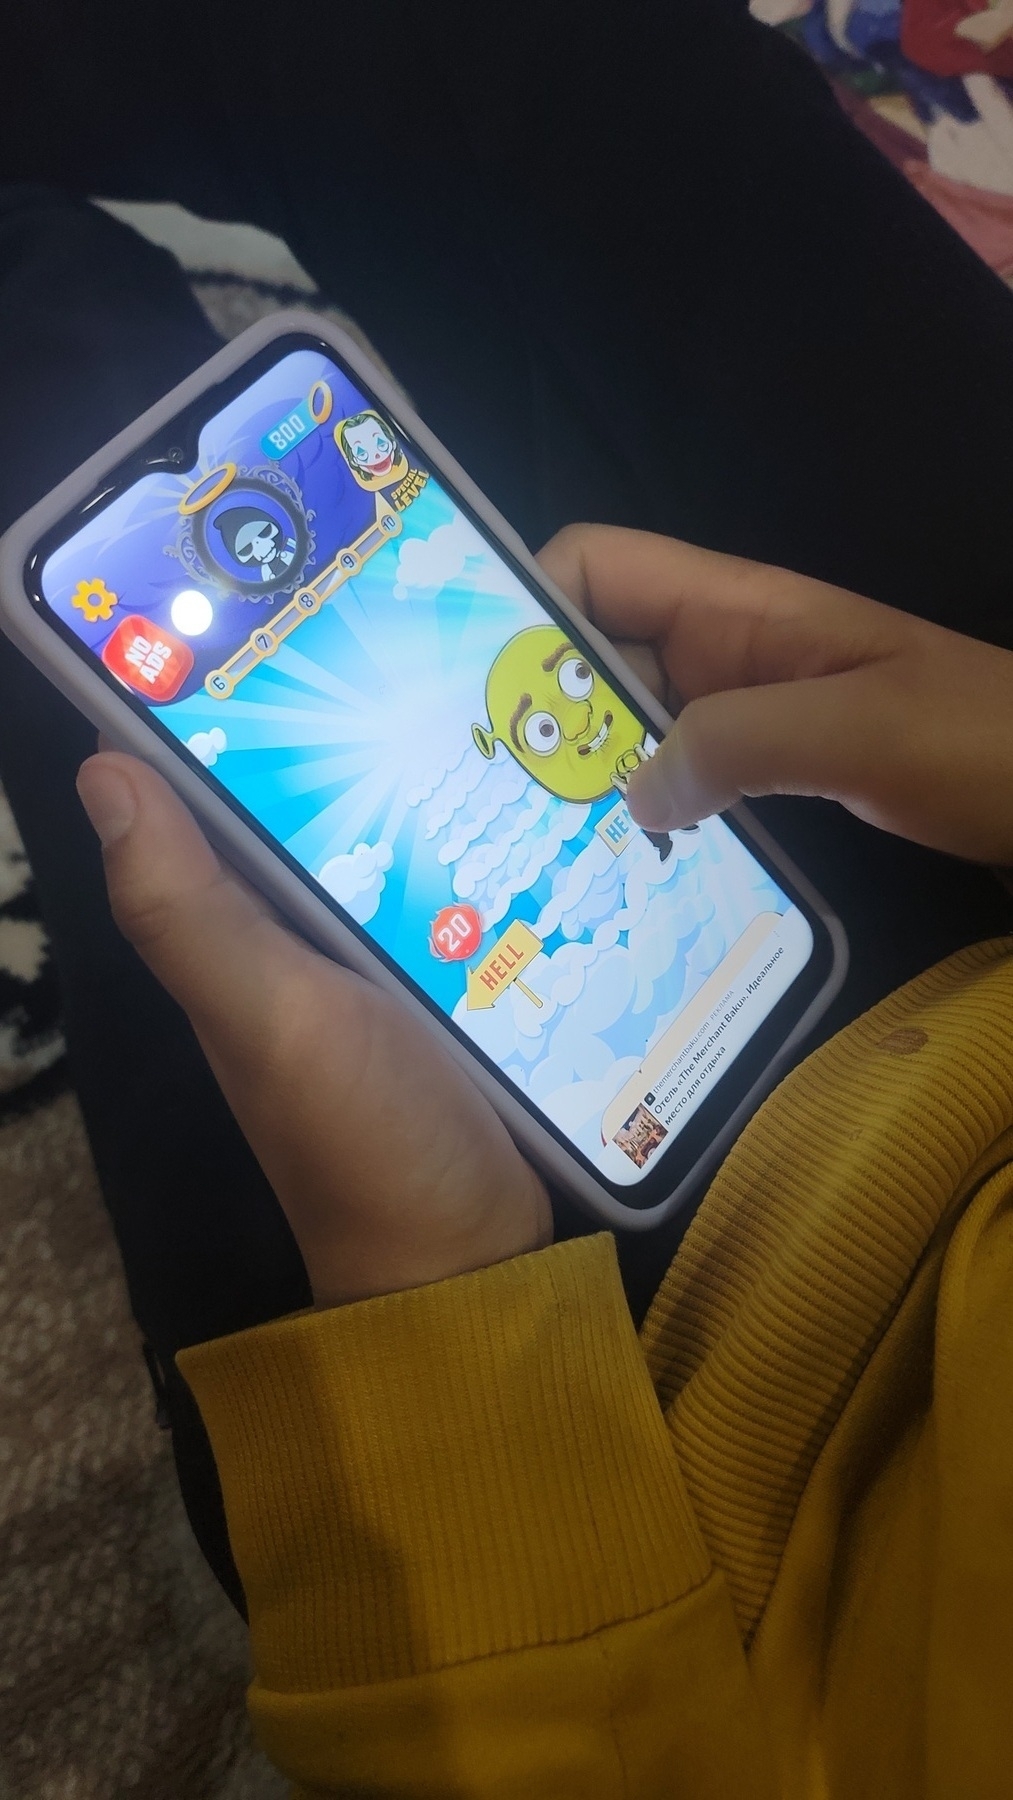 person with a phone in their hands. game open with left side of screen labeled as Hell (right as Heaven, but not visible). user is dragging a cartoon version of Shrek to the Heaven side